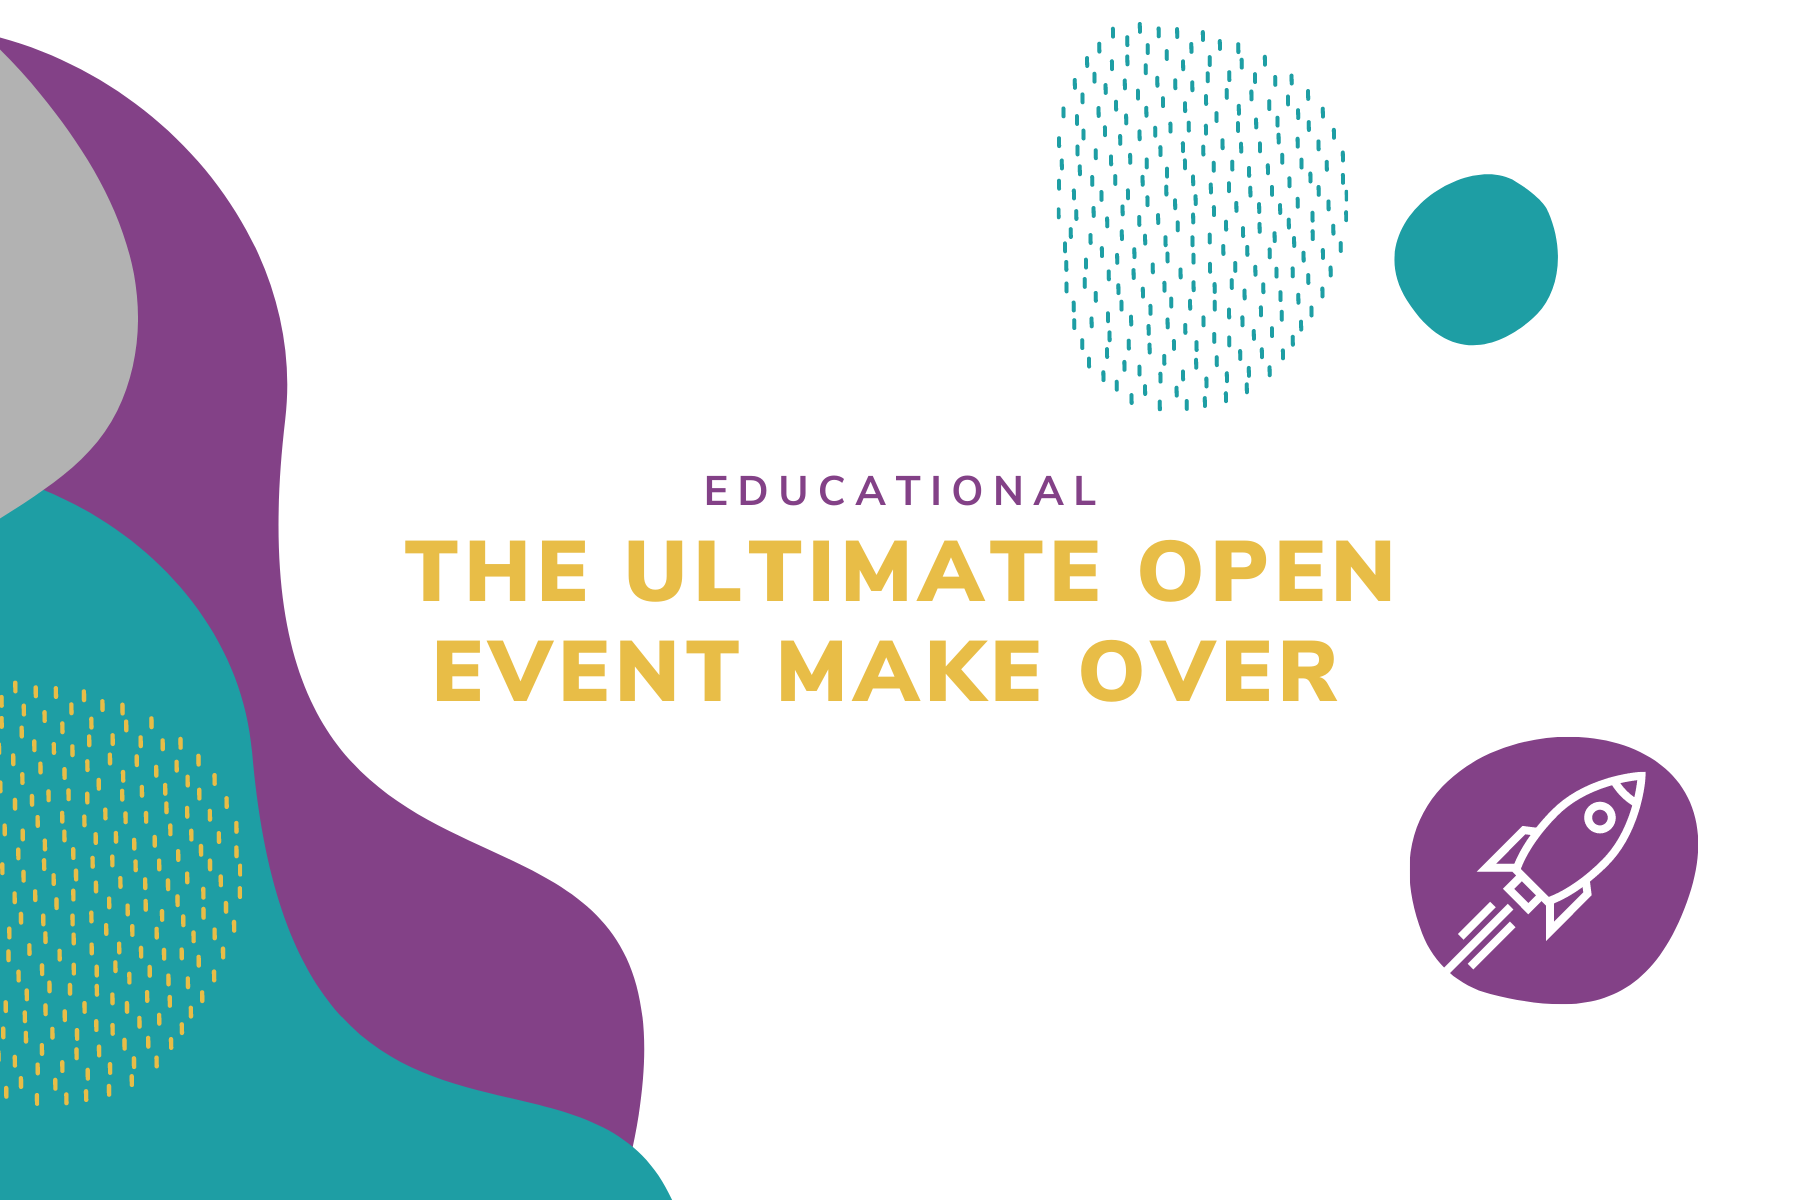 The Ultimate Open Event Make Over